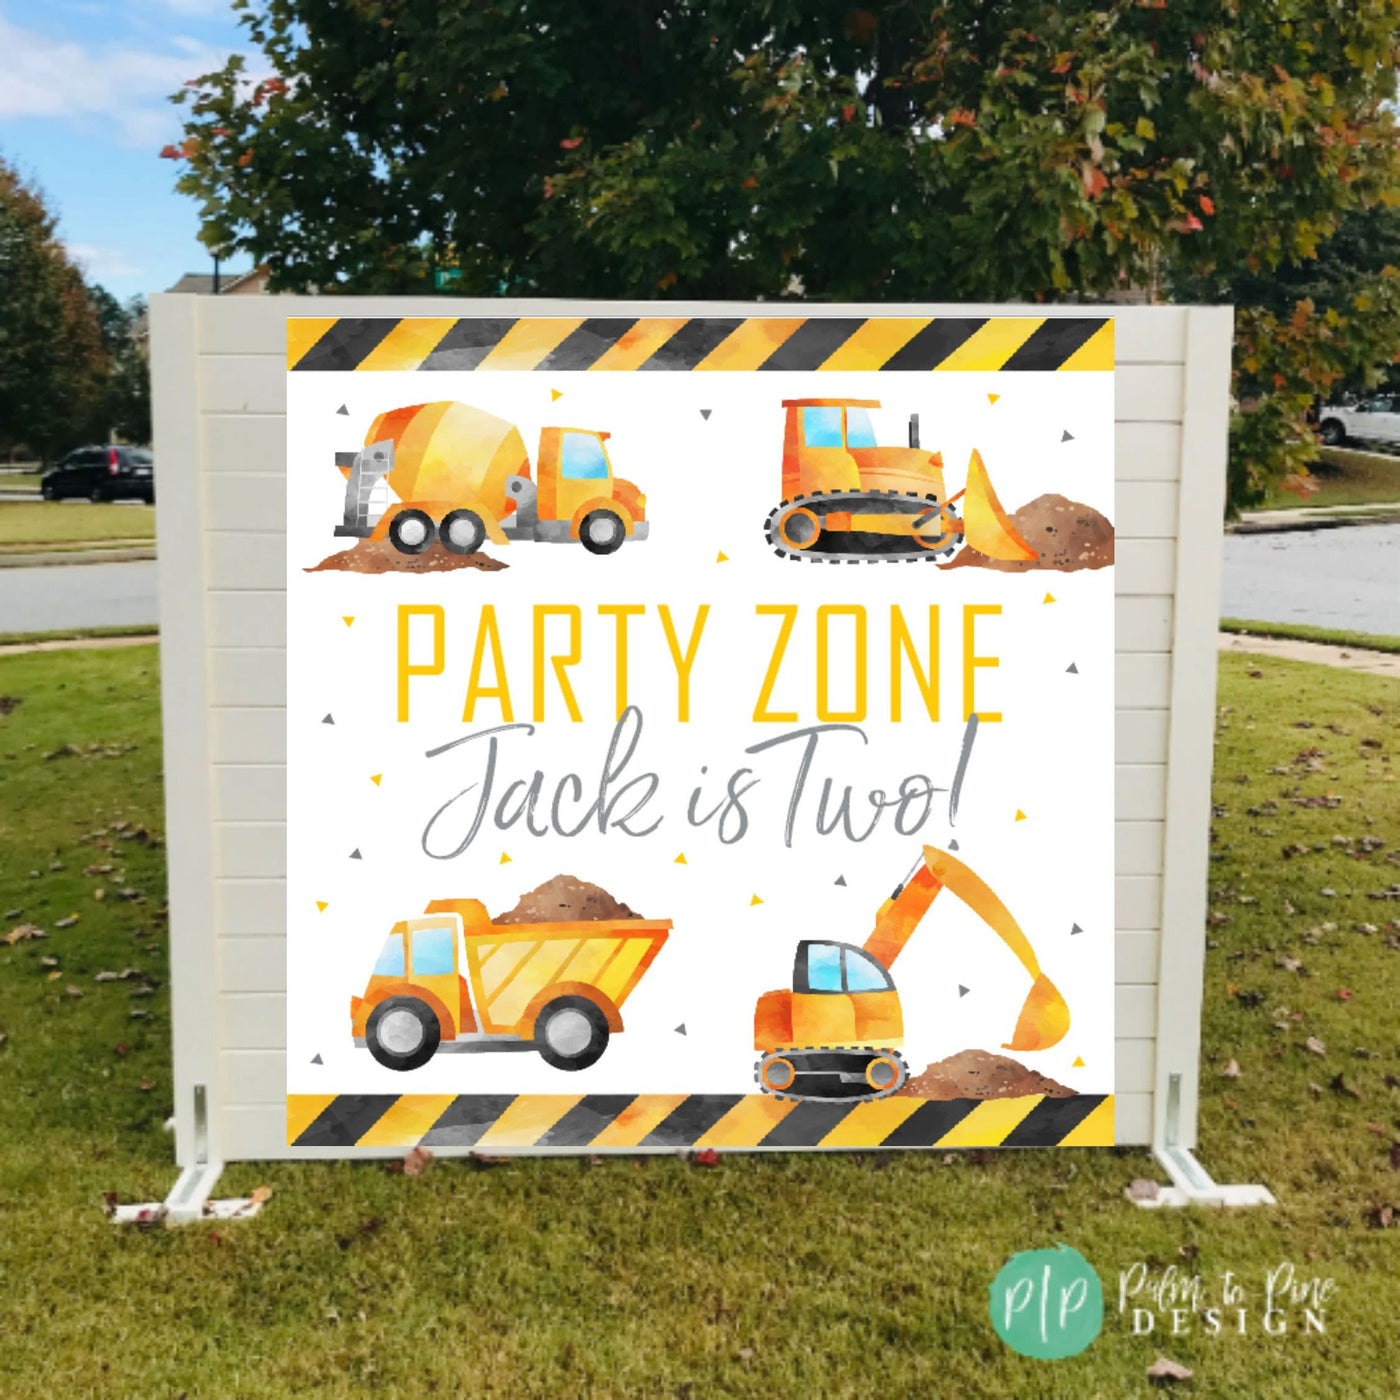 Construction Personalized Banner, Construction Birthday Banner, Boys Construction Birthday Backdrop, Custom Boys Construction Birthday Decor